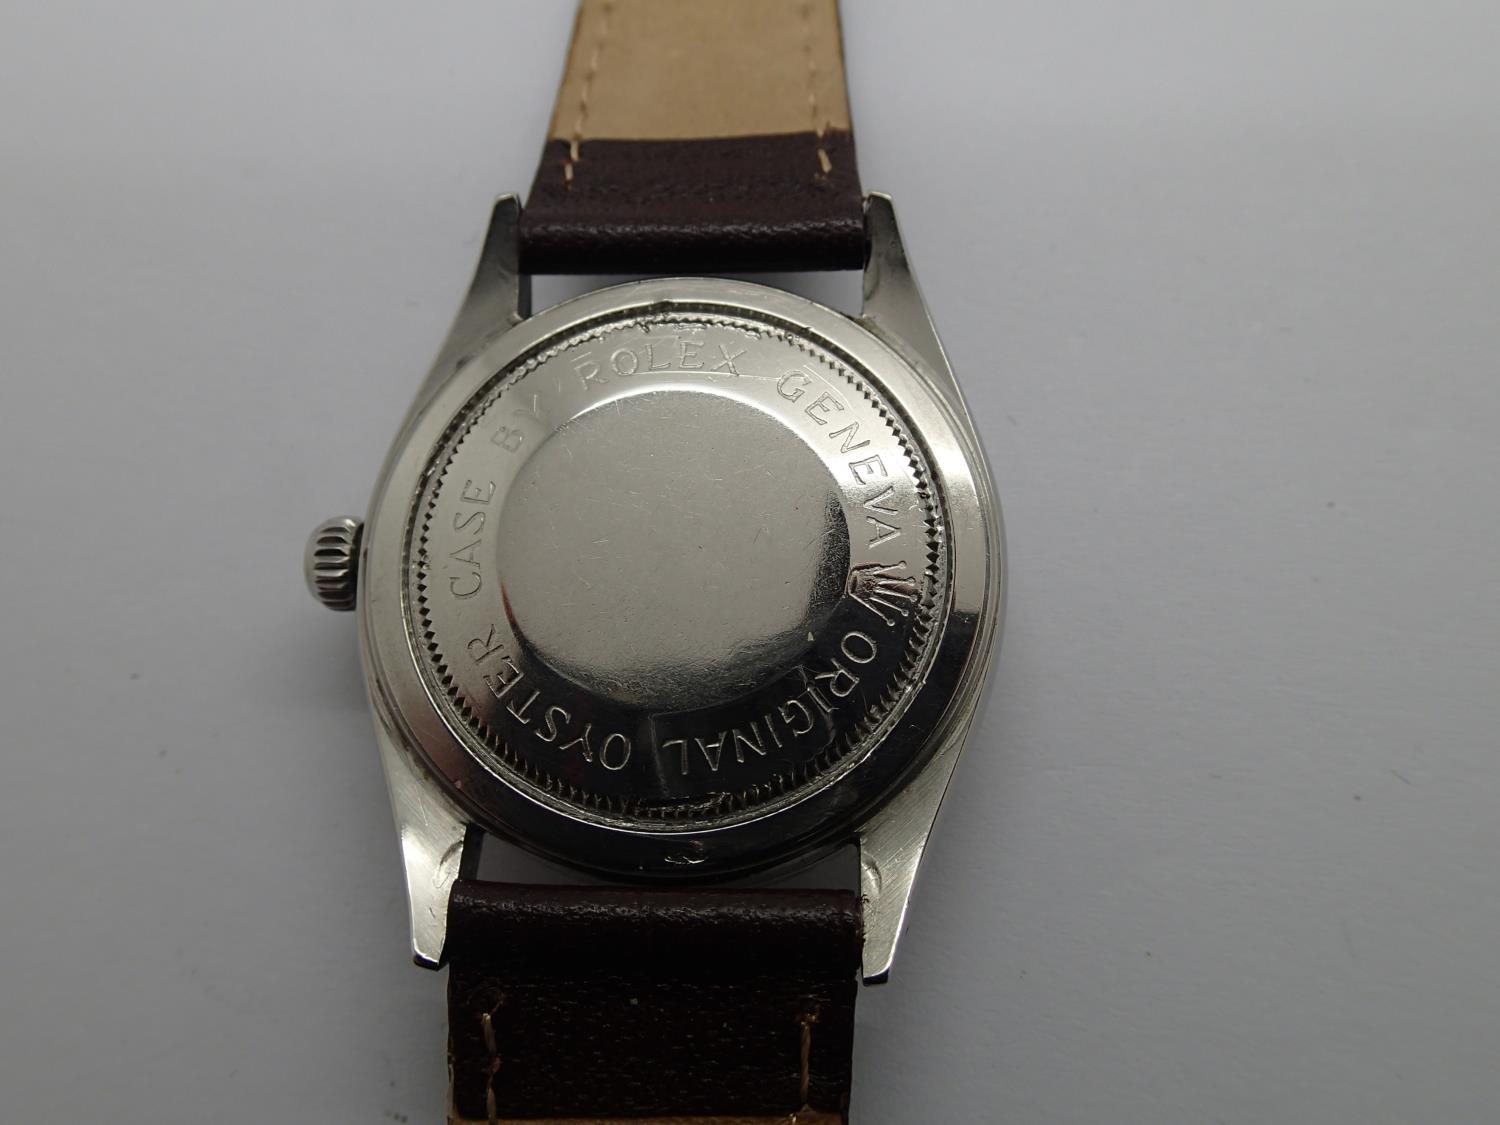 Vintage Tudor Prince Oyster gents automatic wristwatch c1958 on a new leather strap - Image 2 of 2